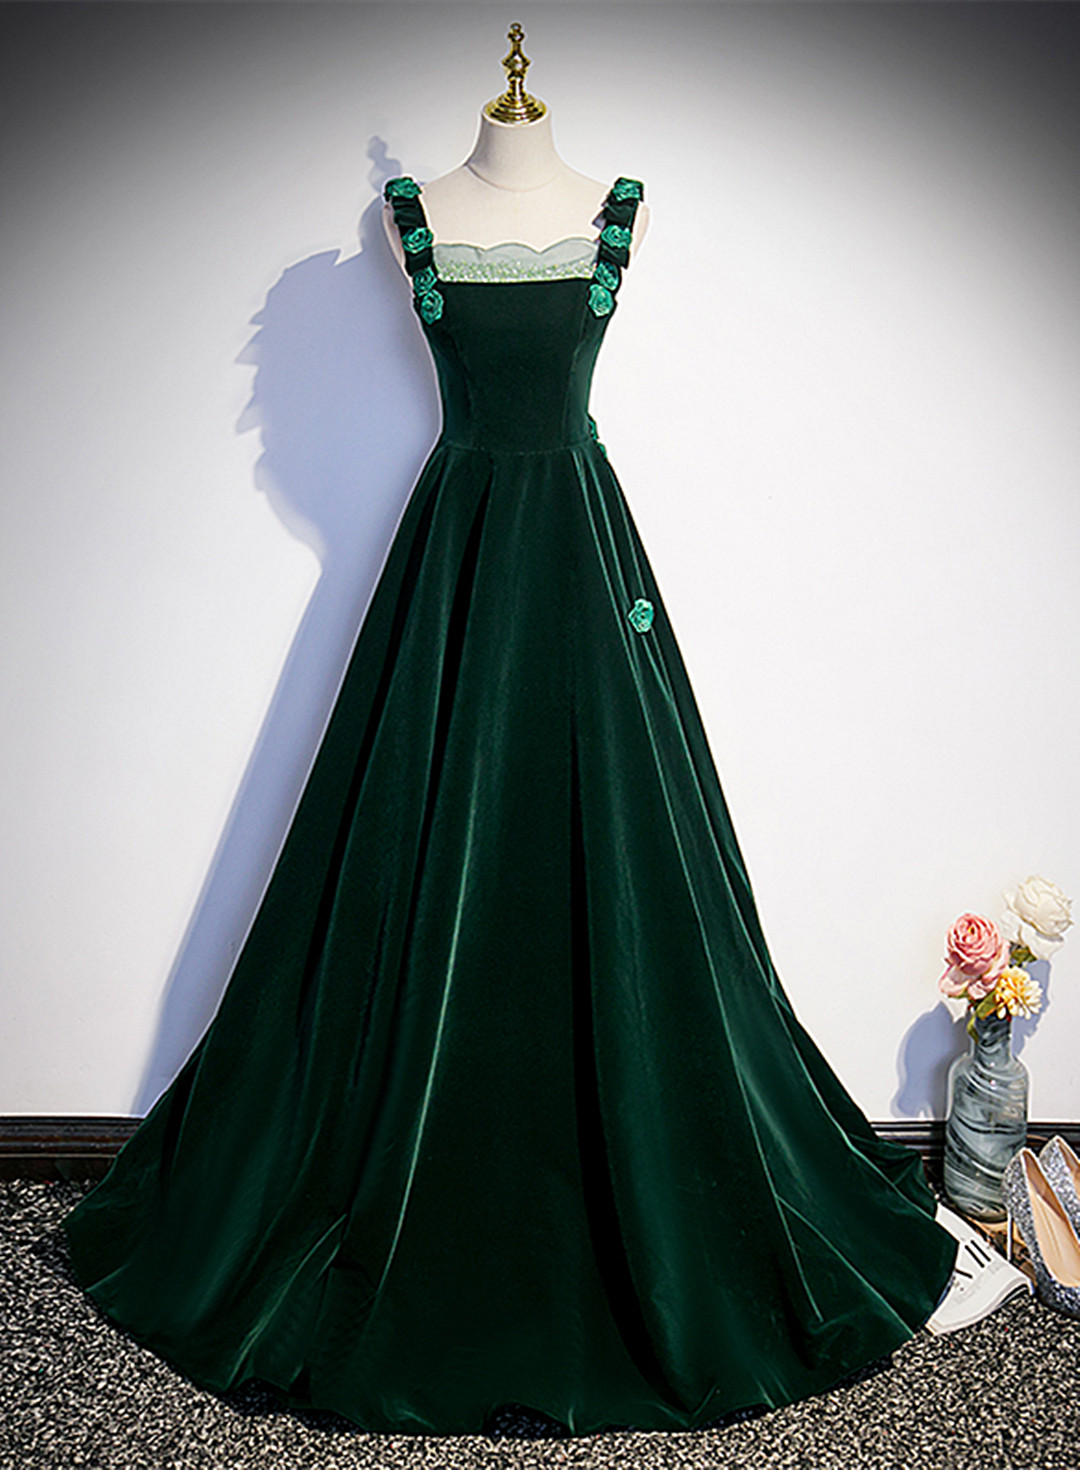 Green Velvet Straps Long Formal Gown With Flowers, Green Wedding Party Dresses